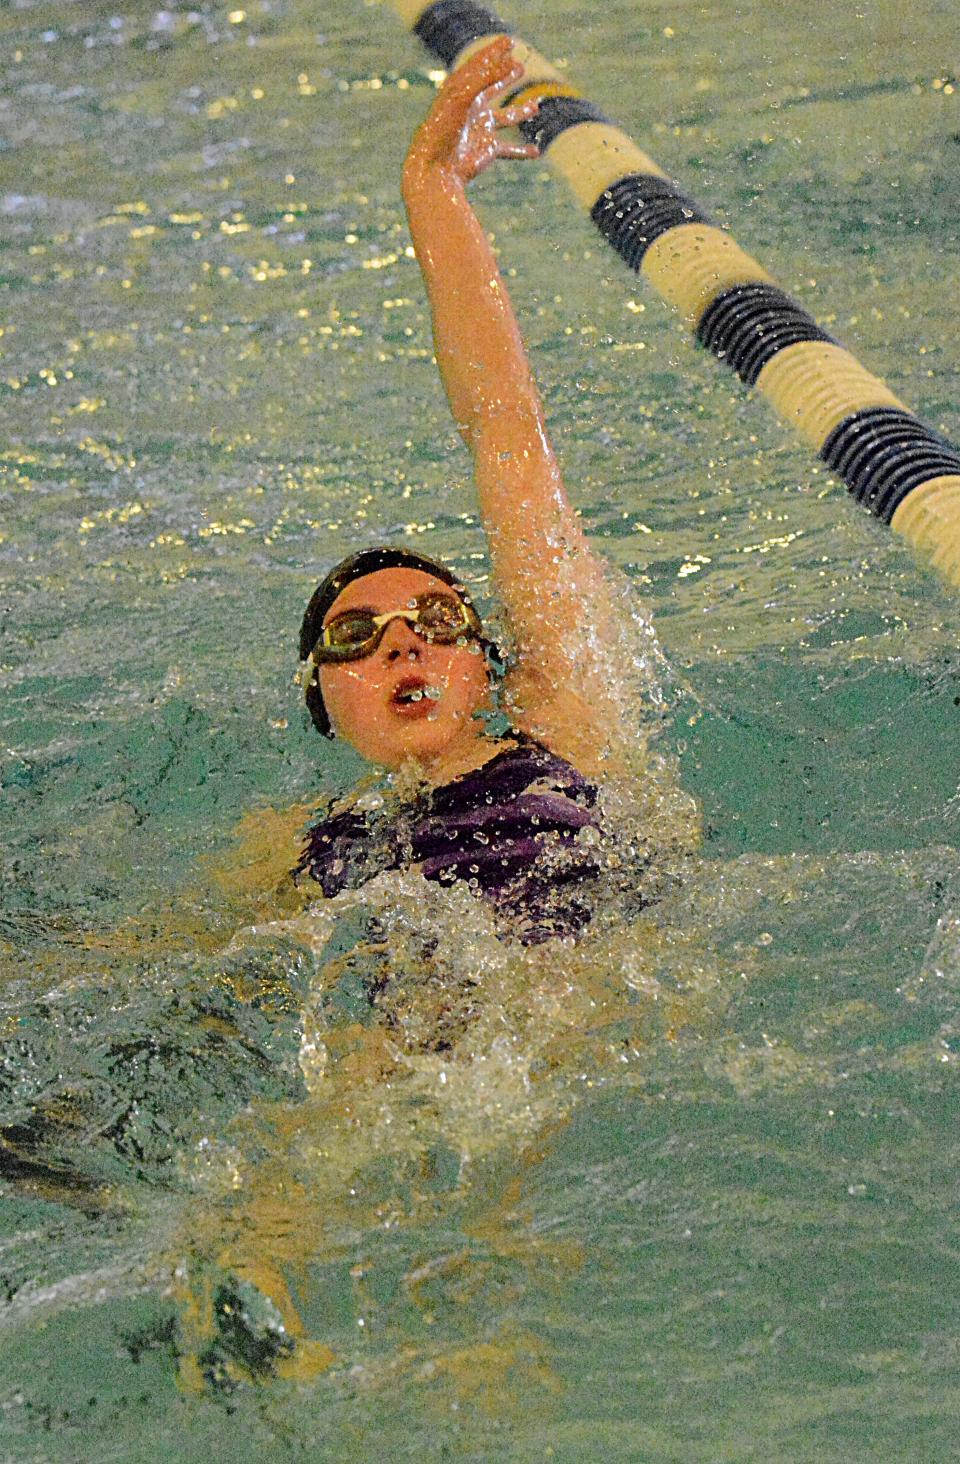 Josephine Waite produced one of 29 event winners for the Watertown Area Swim Club in the 2022 South Dakota State Long Course Championships over the weekend at Sioux Falls. The Dolphins finished second in the team standings behind the Sioux Falls Swim Team.